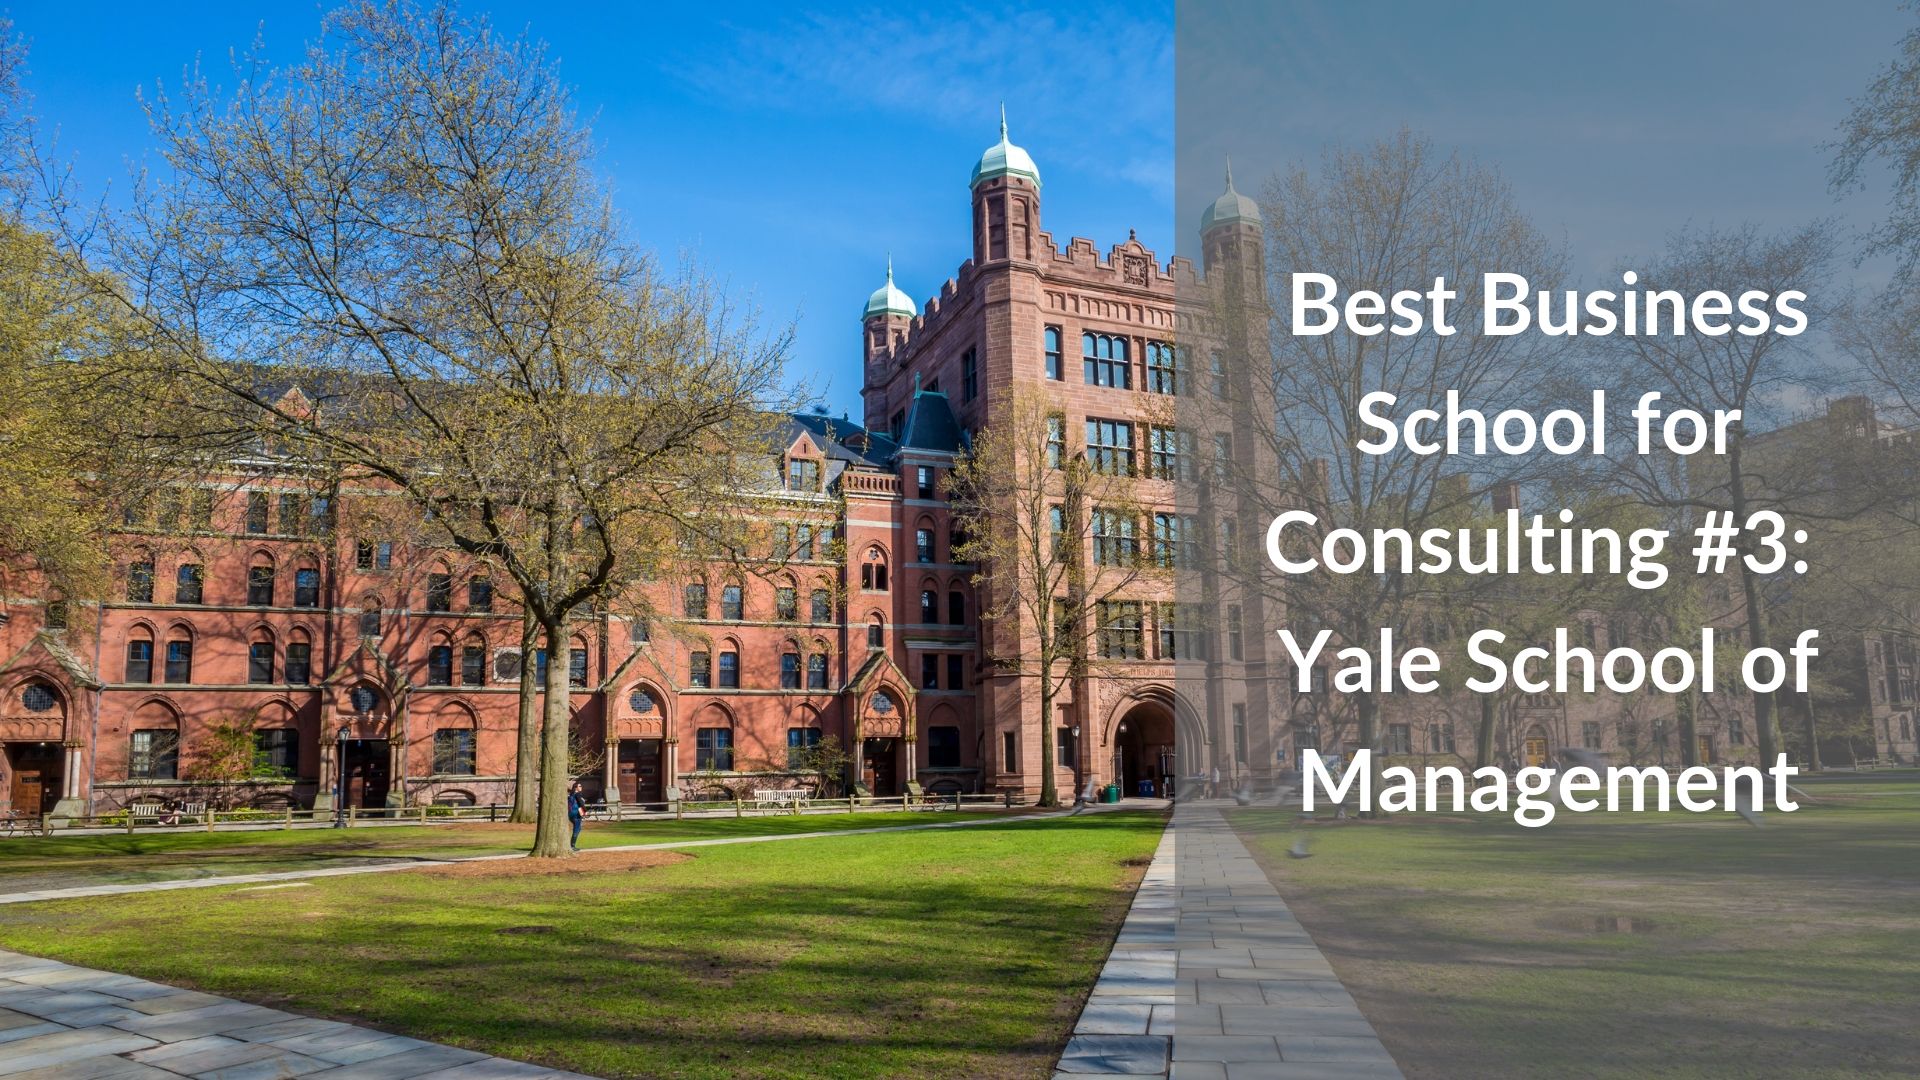 Best Business School for Consulting #3 - Yale School of Management